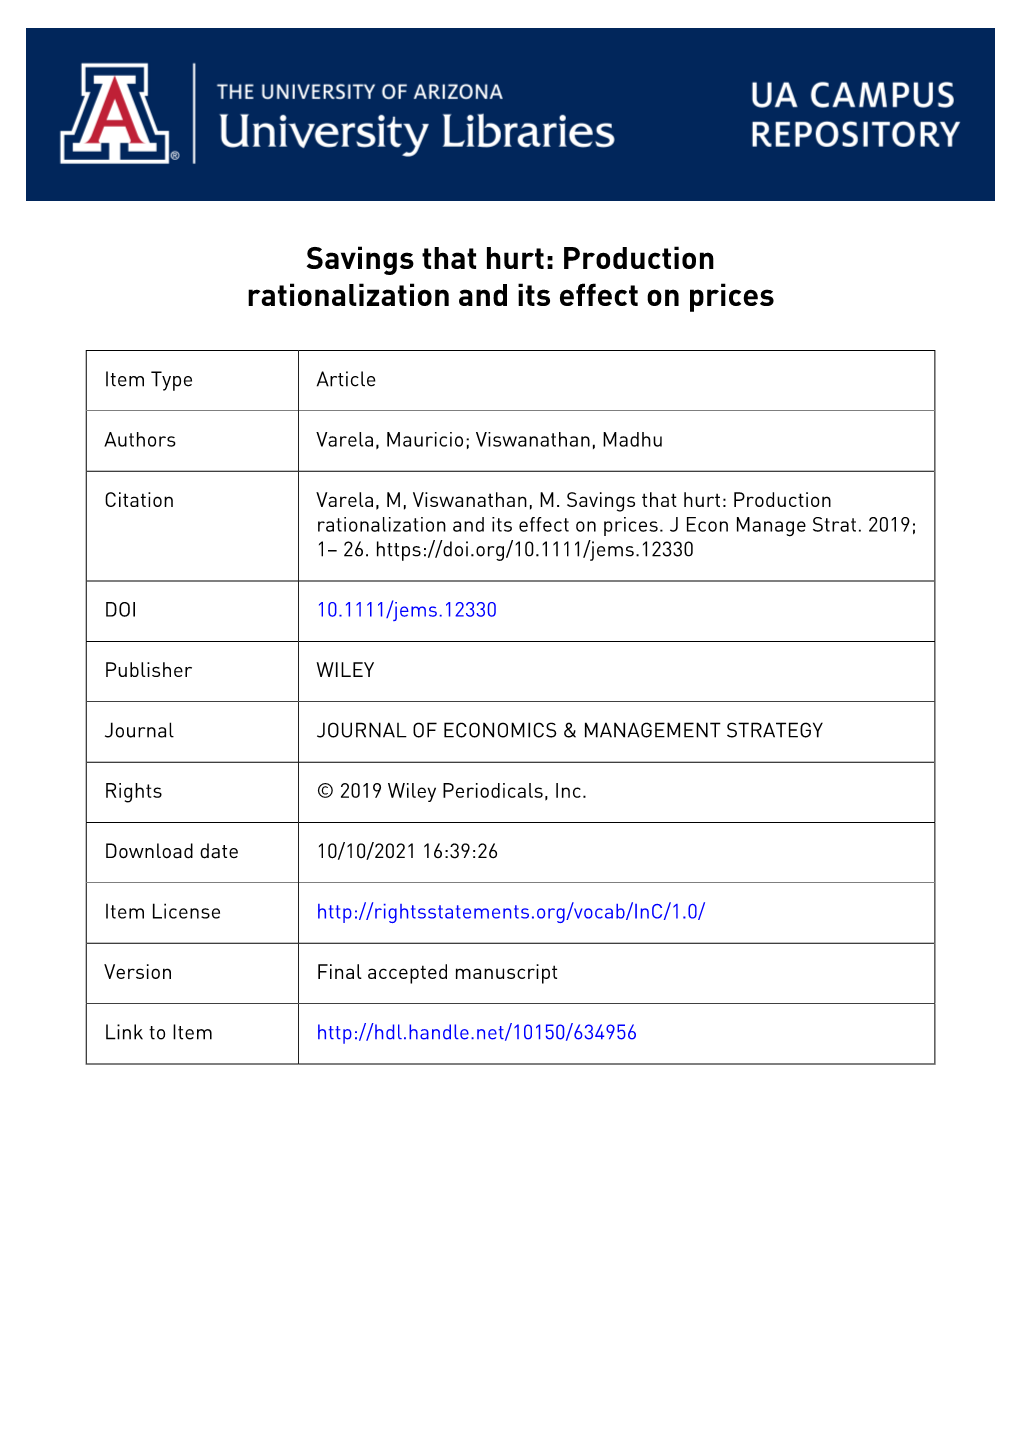 Savings That Hurt: Production Rationalization and Its Effect on Prices